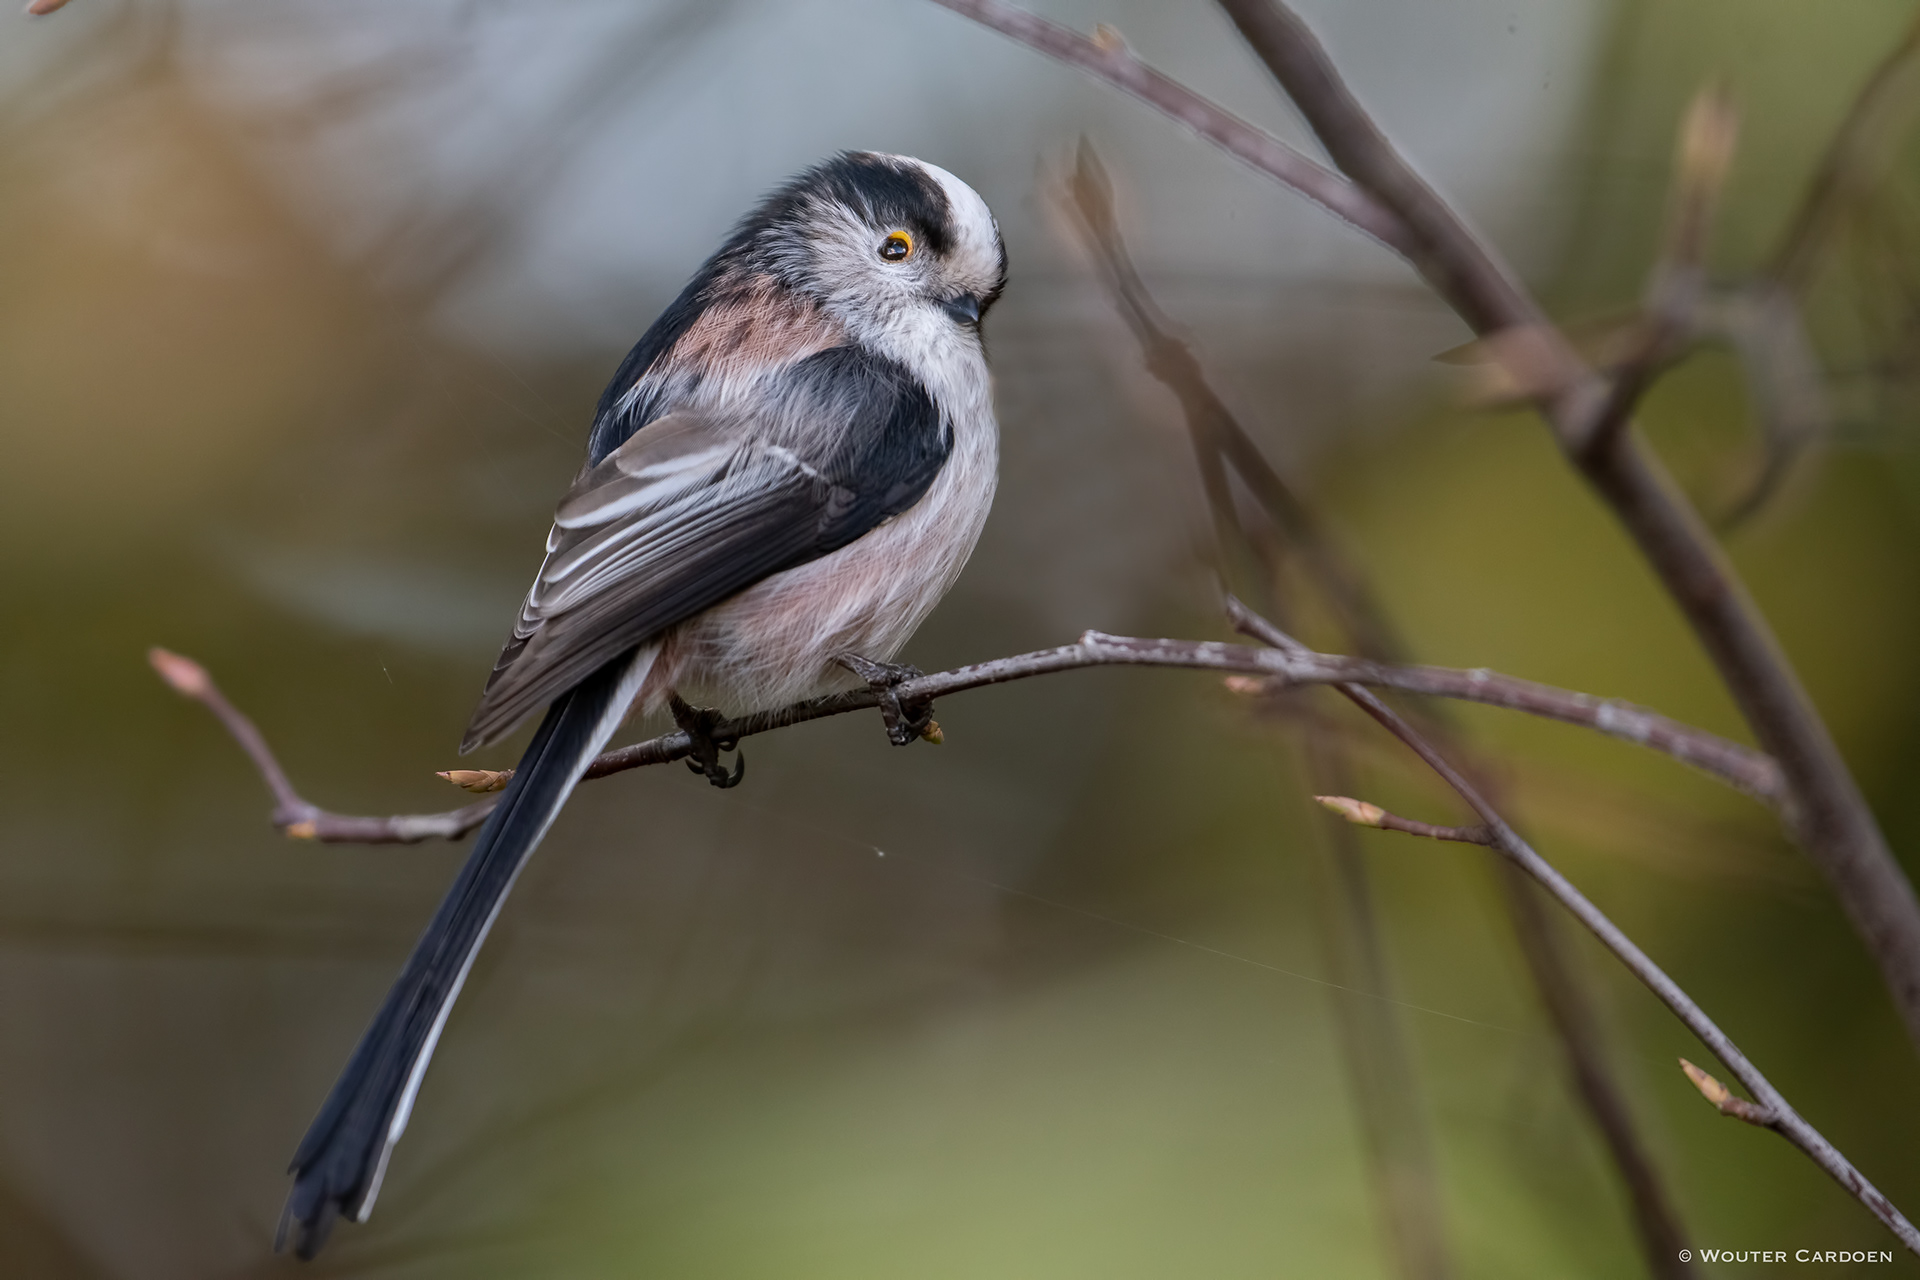 Long-tailed tit - Staartmees - Aegithalos caudatus